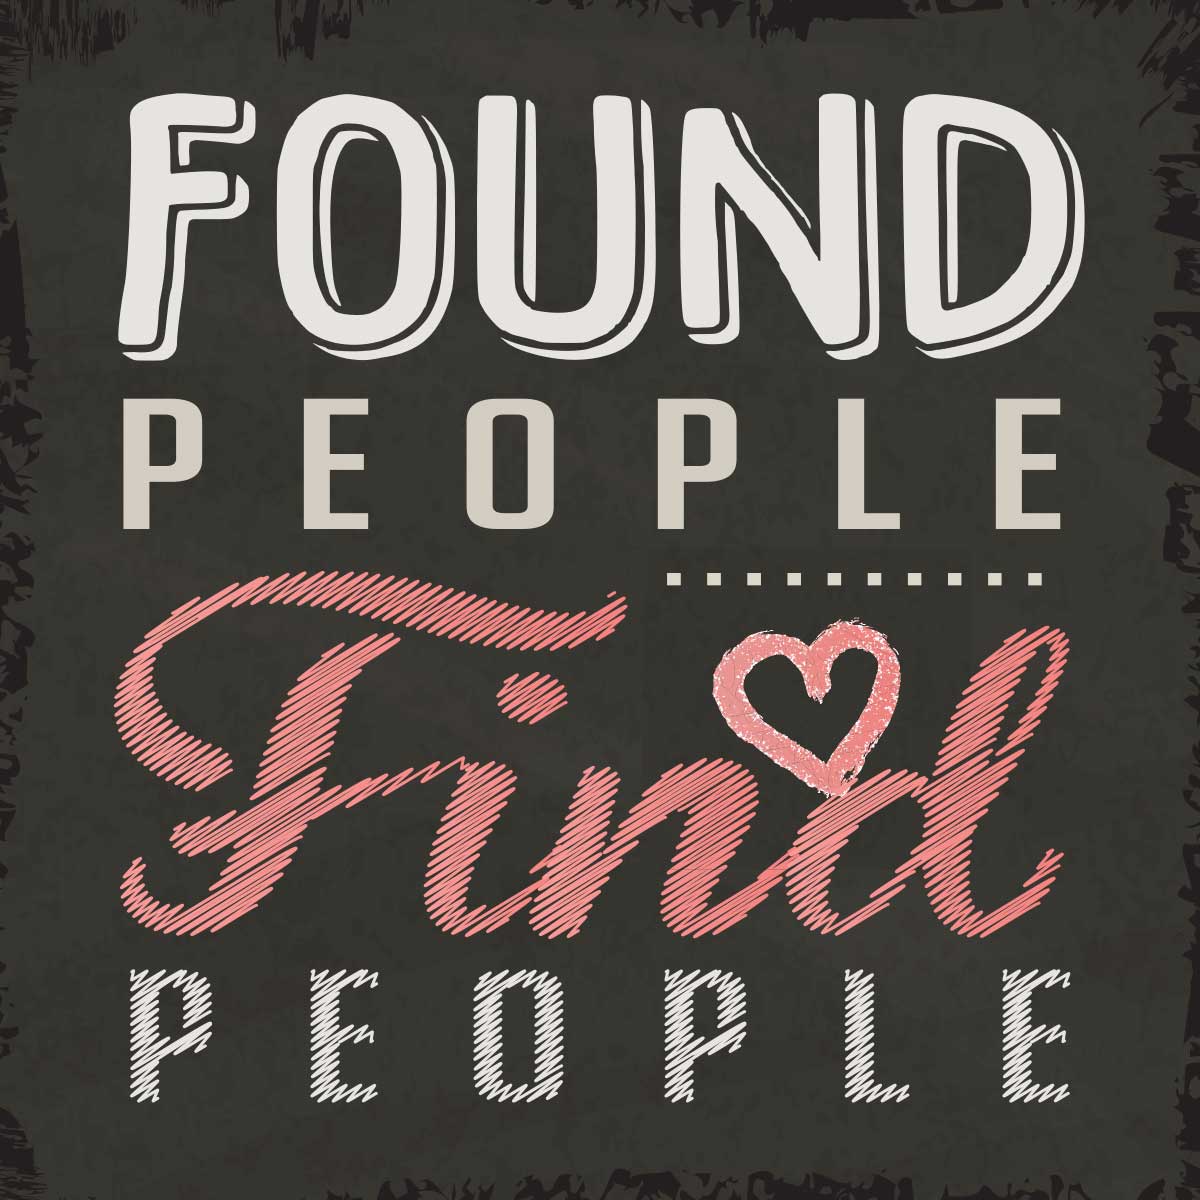 Found People Find People - Journey Church in Pineville Core Value